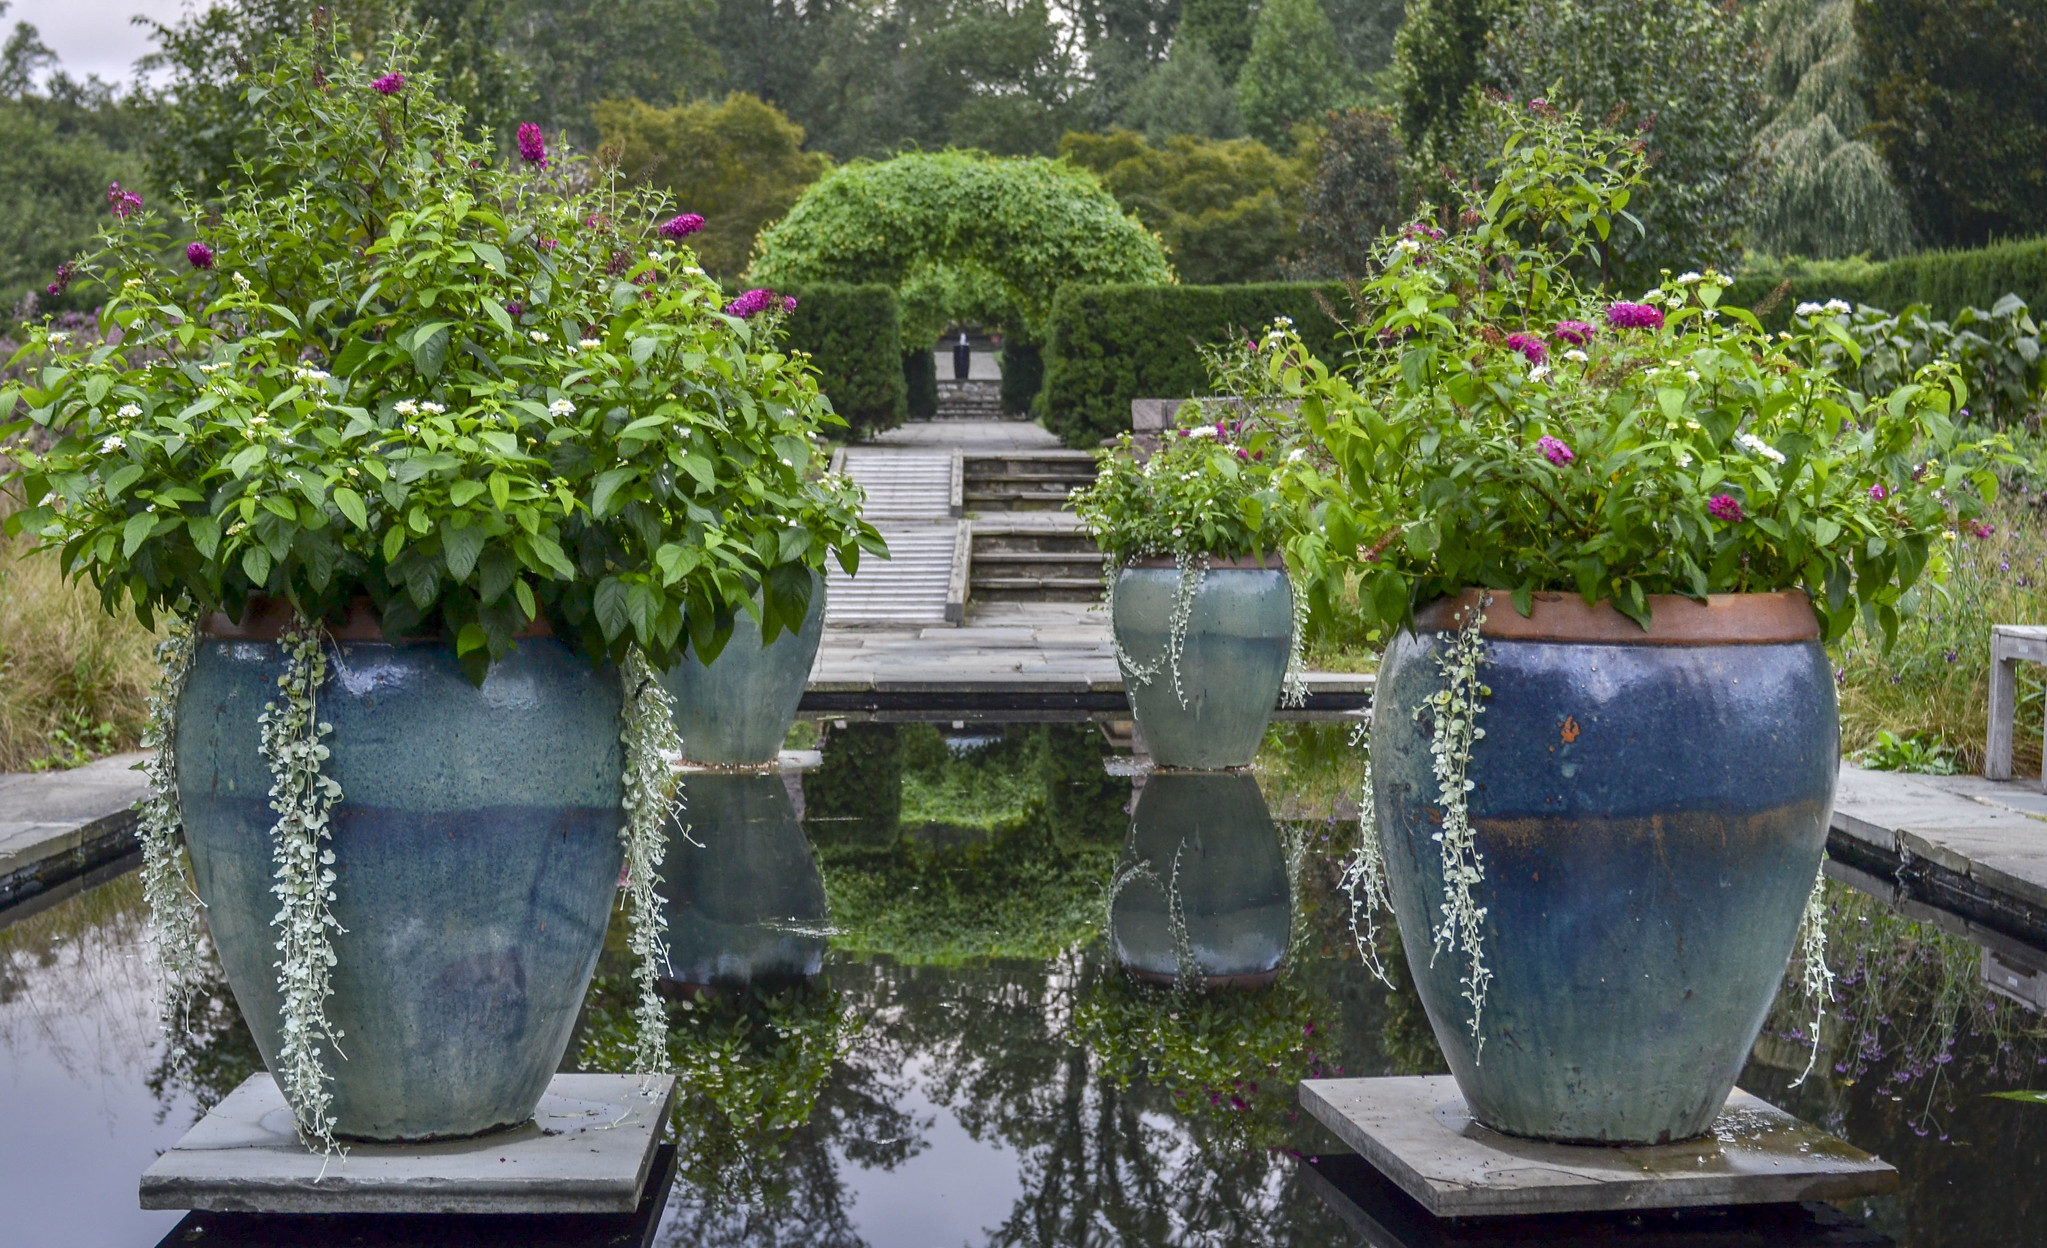 Oversized blue urns filled with flowering plants.